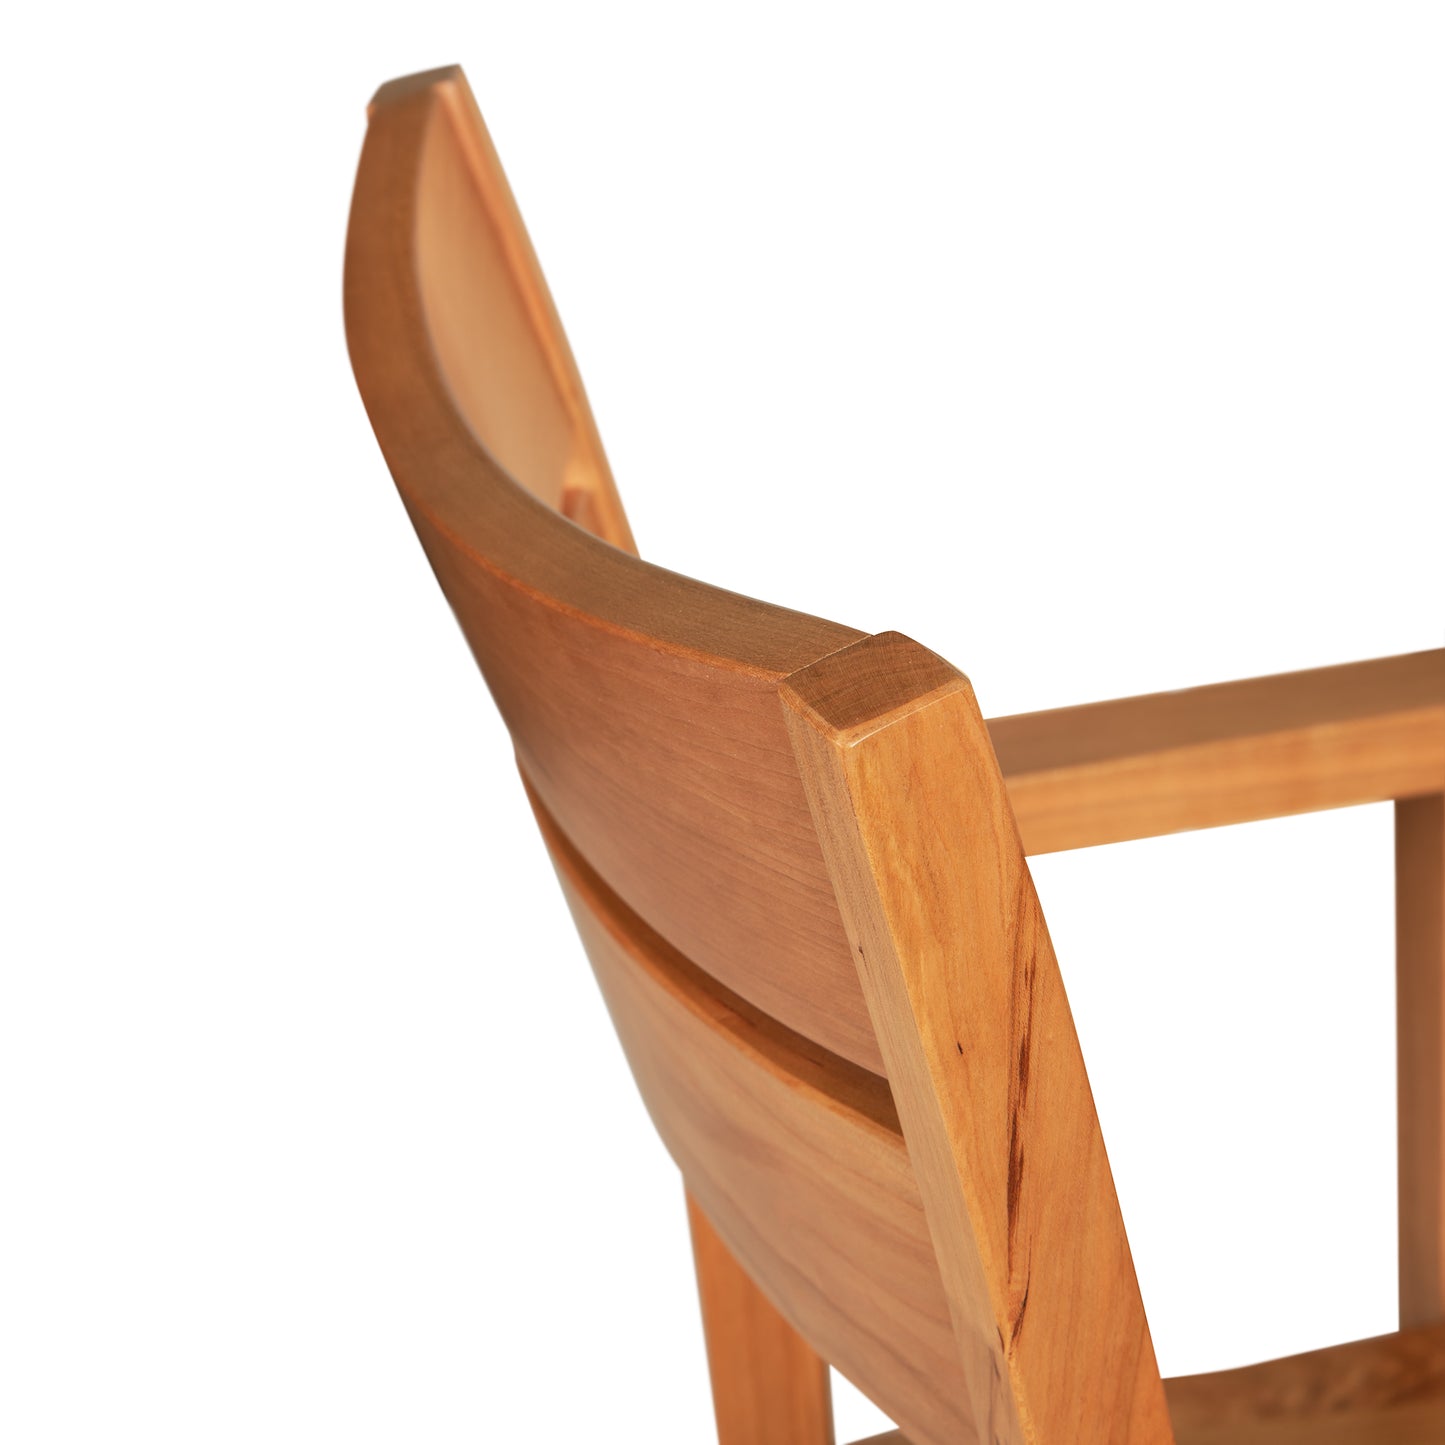 A close up image of a wooden chair.